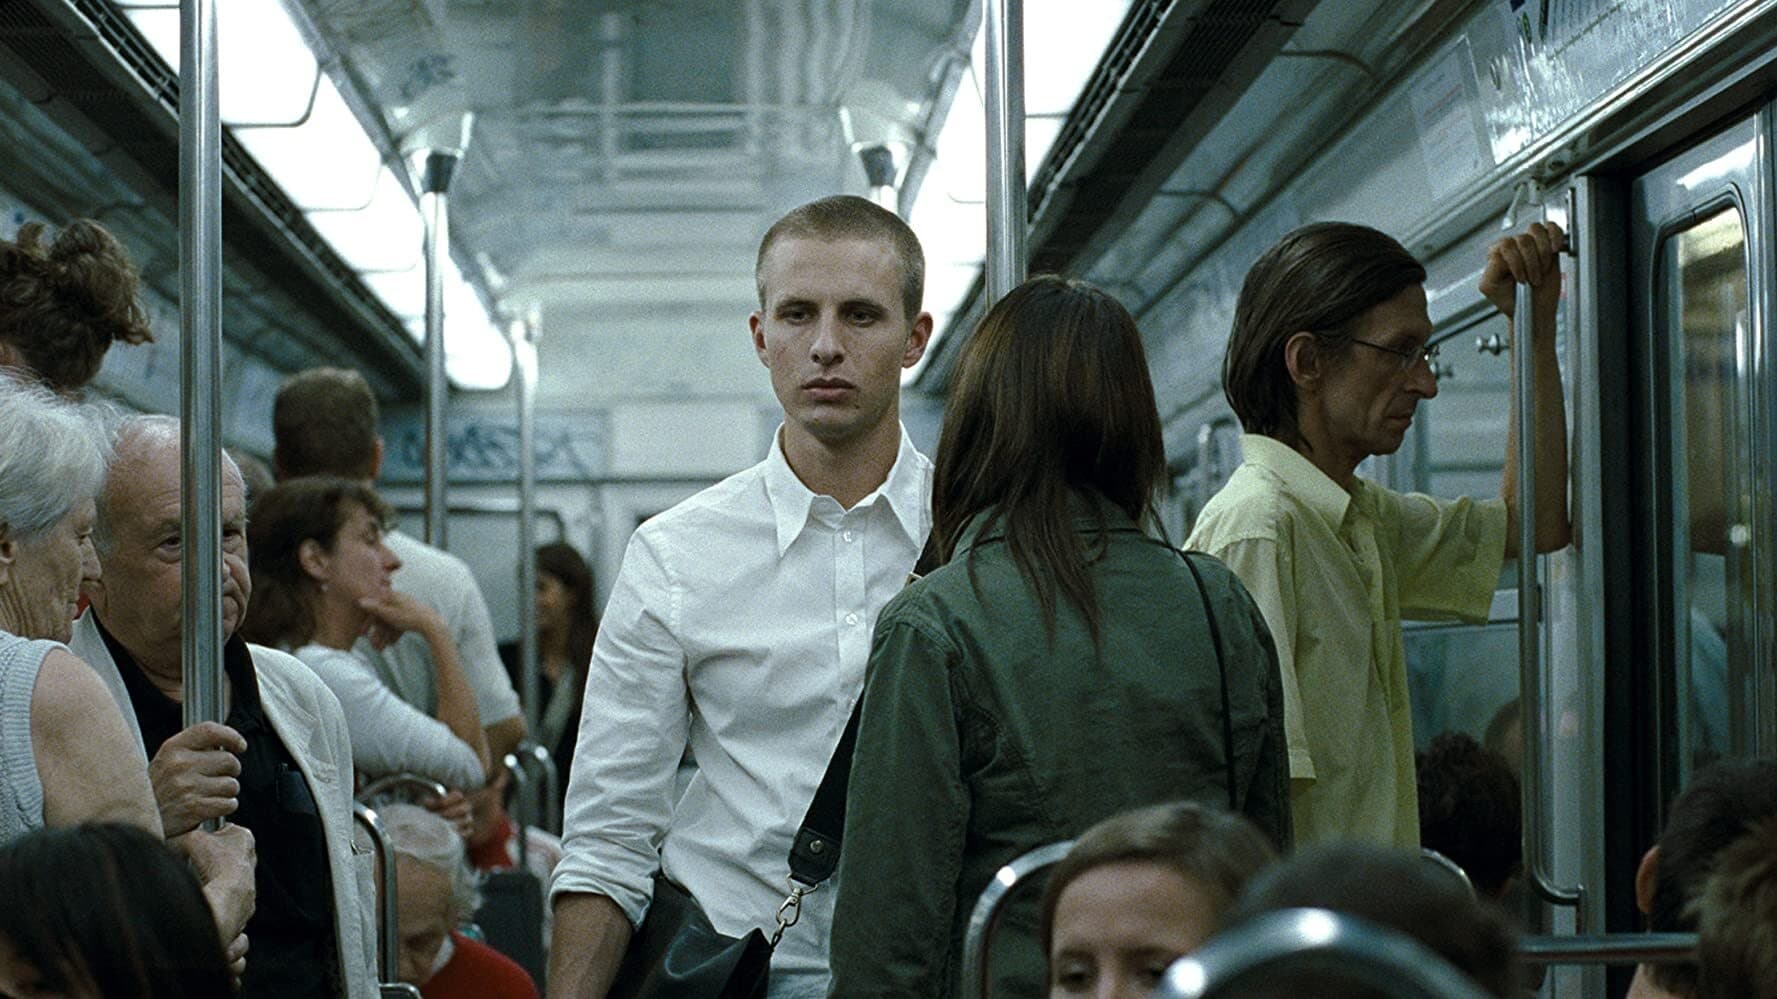 Still from Reprise by Joachim Trier. Protagonist Philipp is pictured wearing a white shirt on the bus, among other passengers. He is looking slightly down and to the side, not straight at the camera, and seems lost in thought.